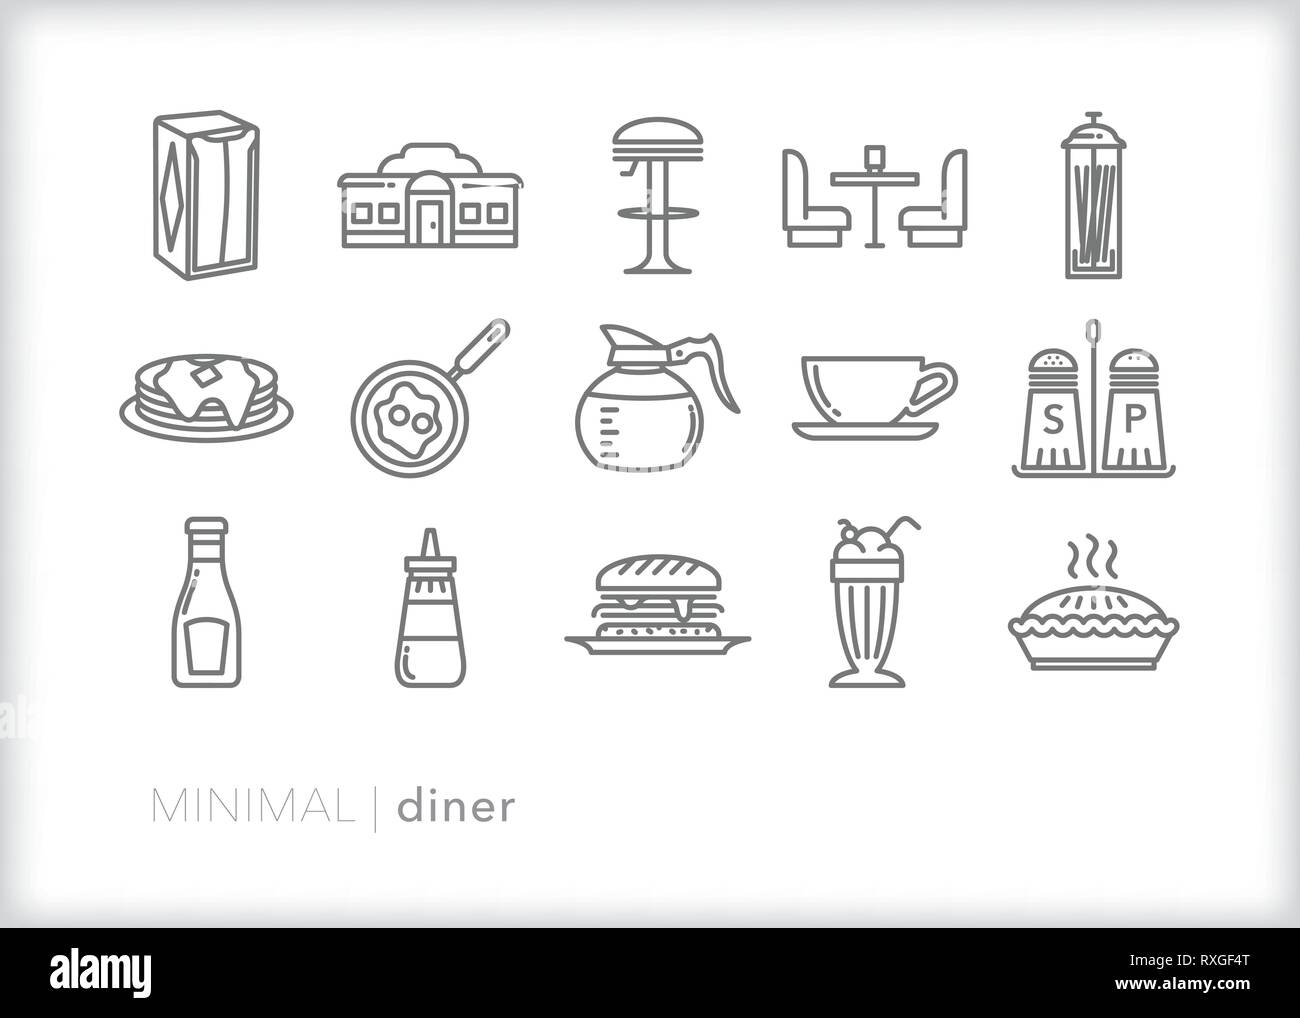 Set of 15 roadside diner food and drink line icons Stock Vector